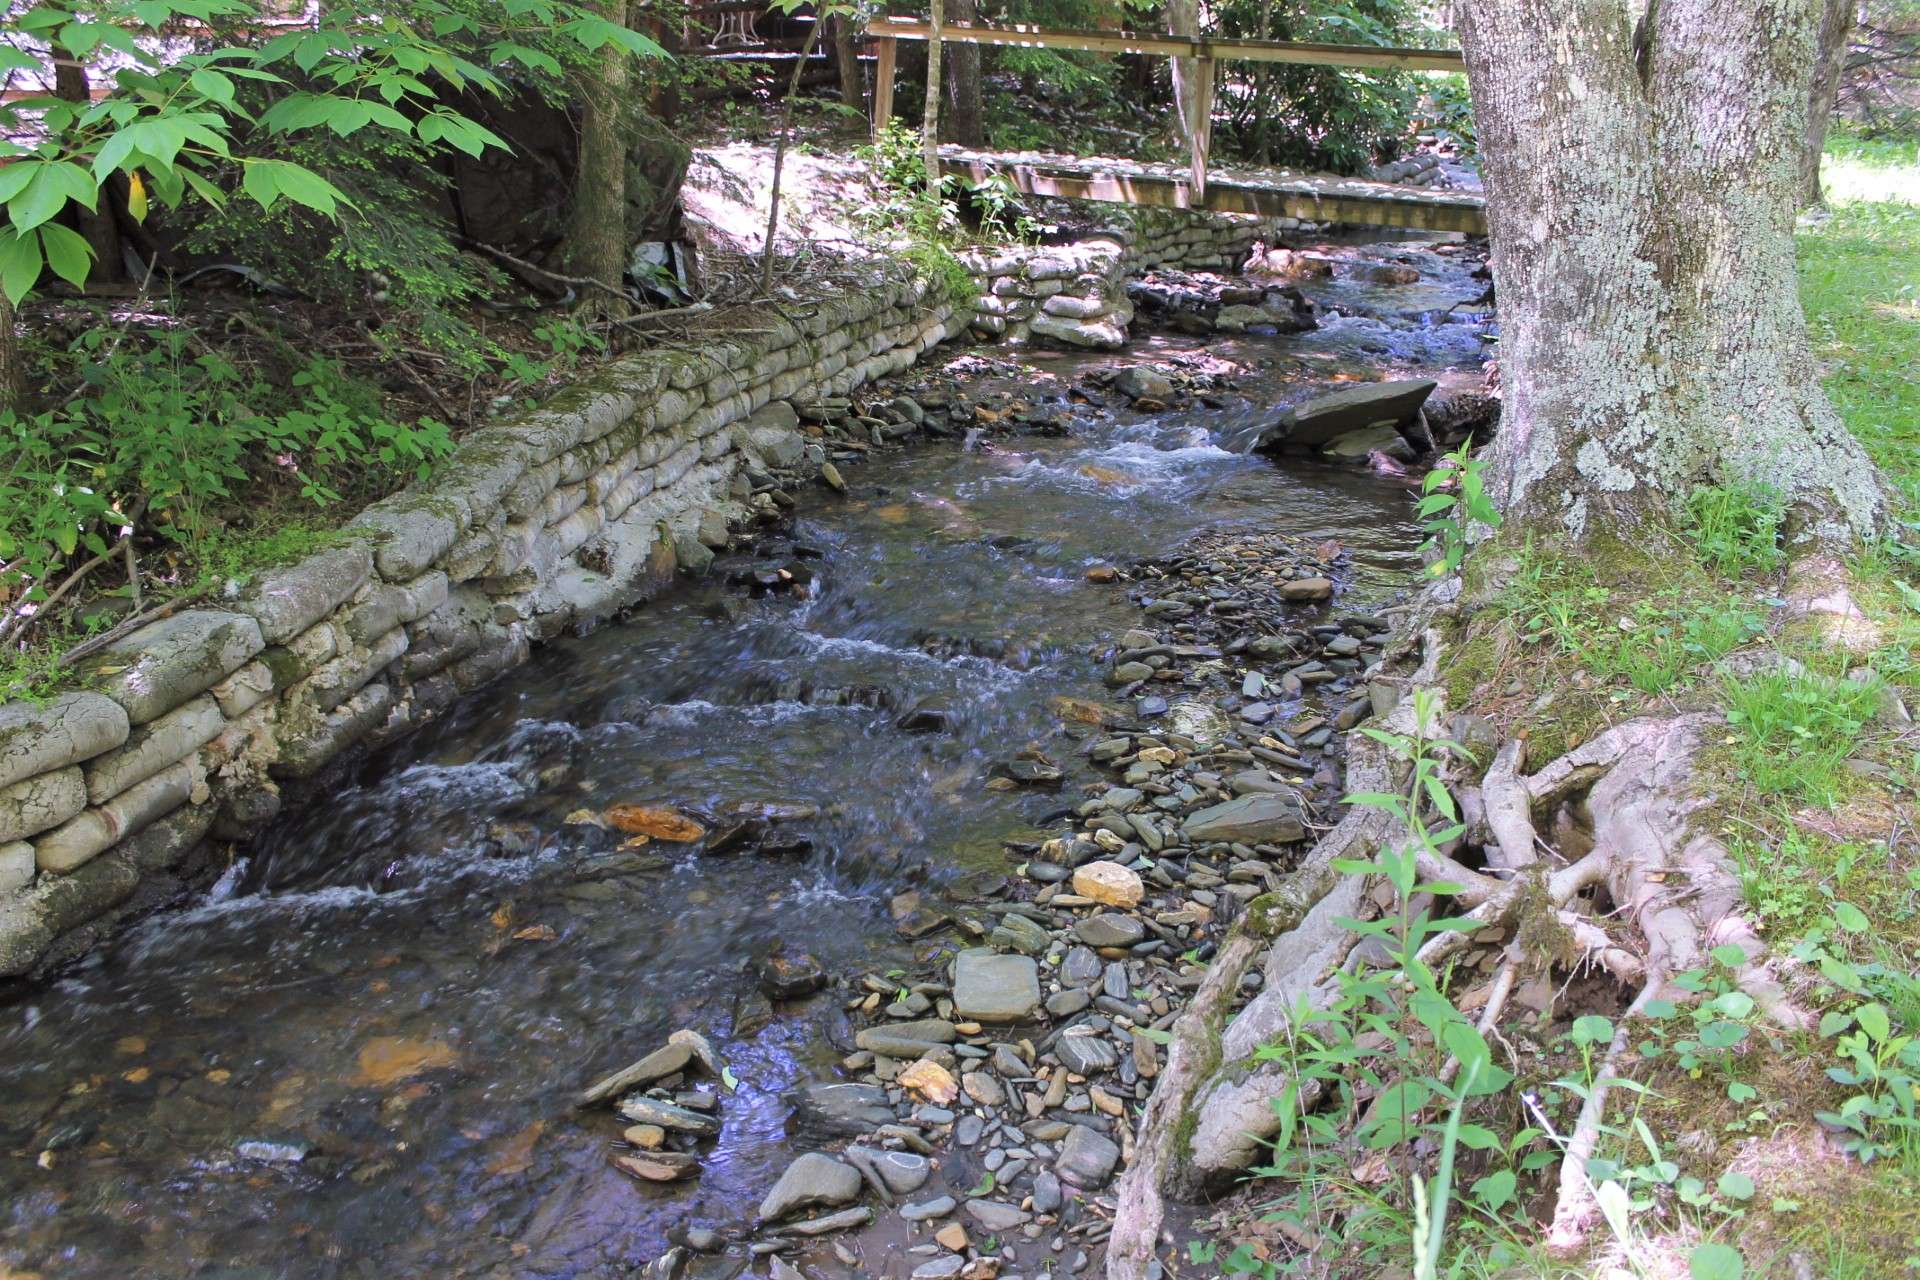 You will enjoy the sounds of the rushing creek and reminisce of fond childhood memories and time spent playing in a mountain creek.